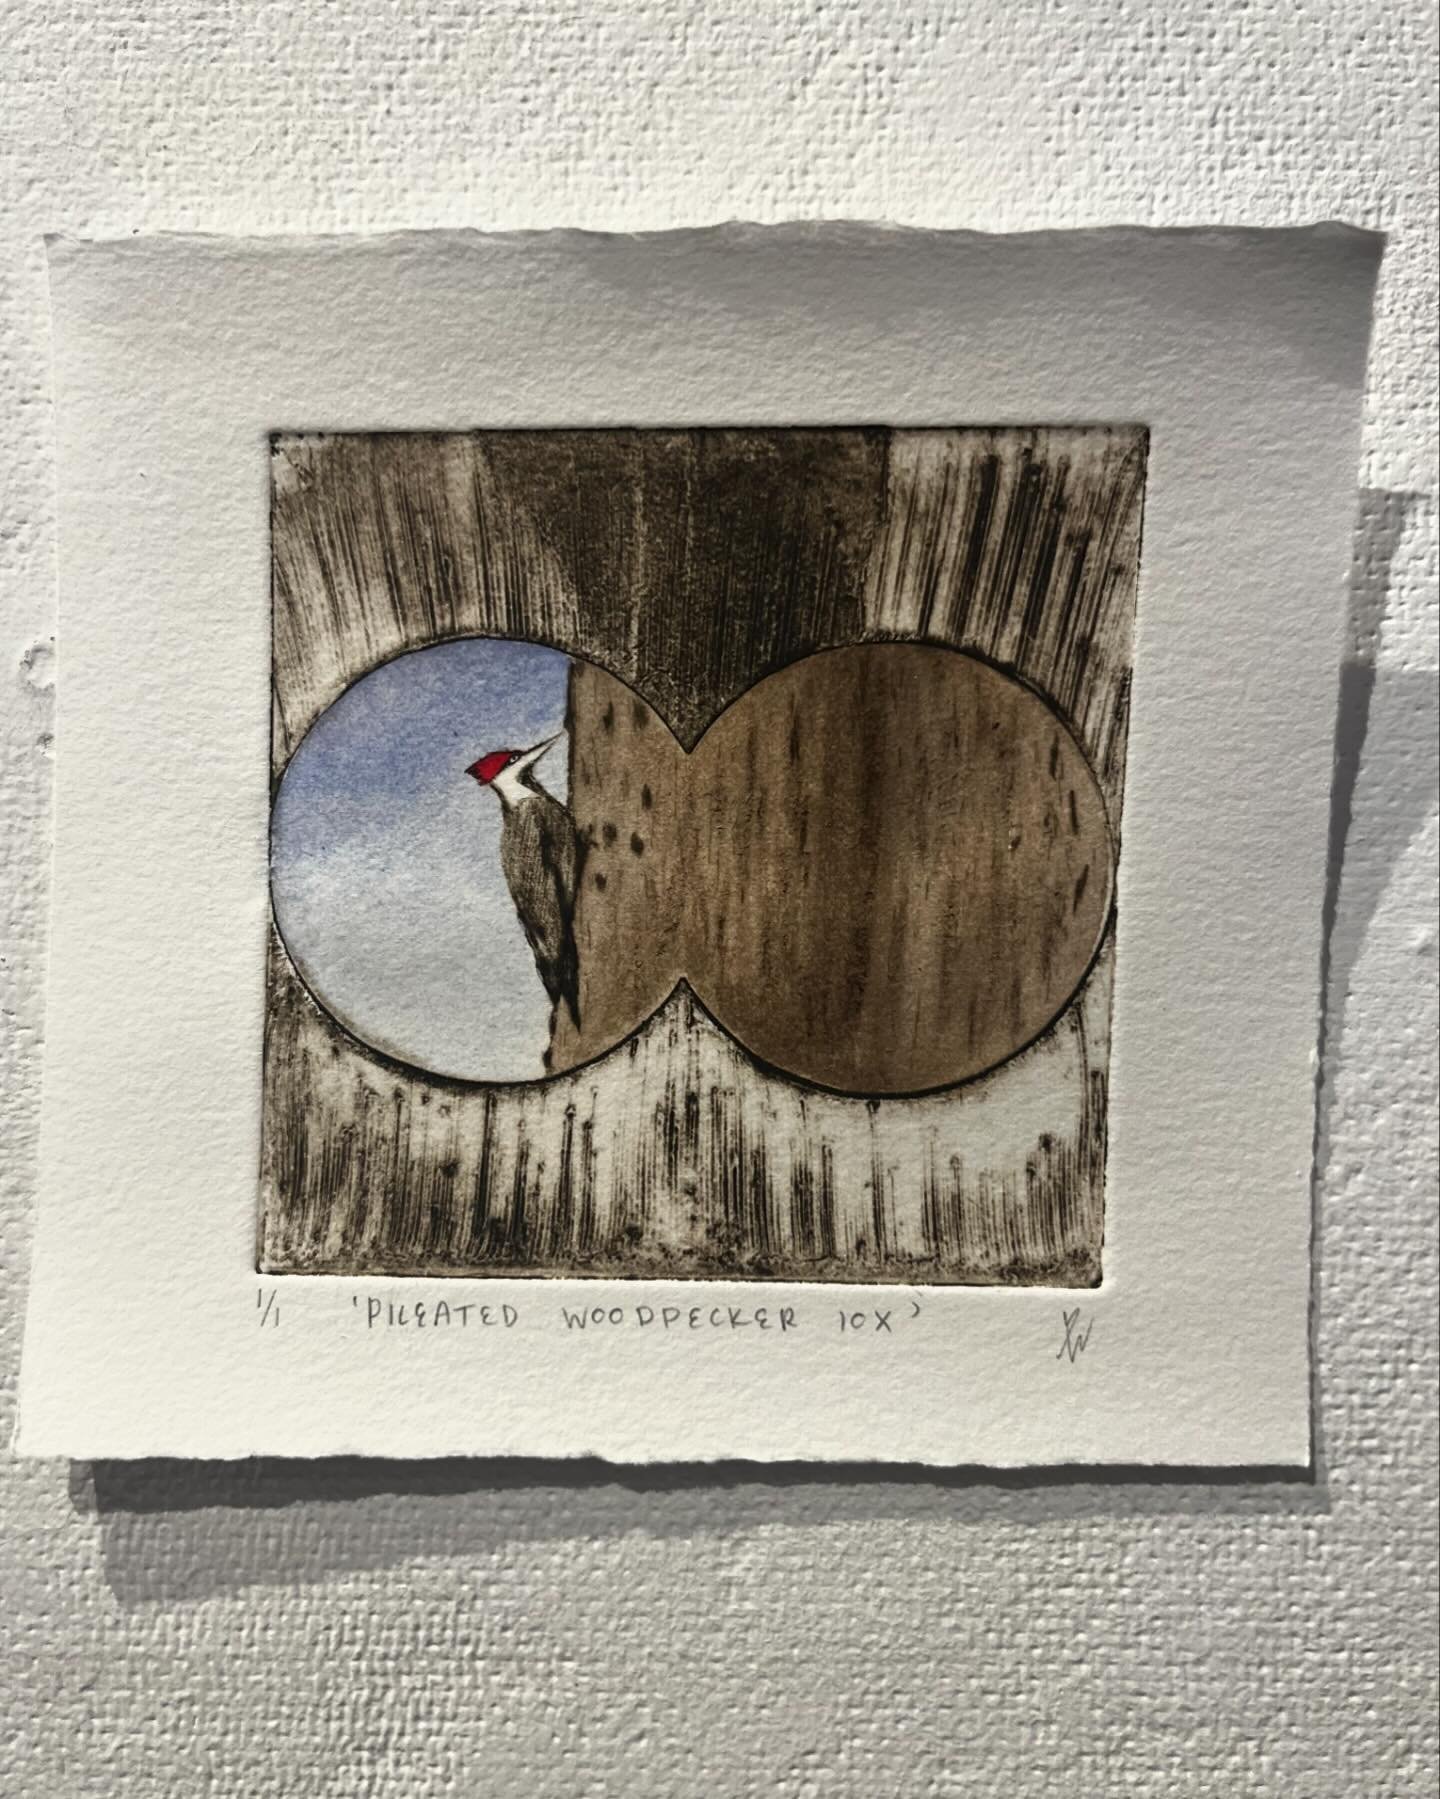 Pileated Woodpecker Monoprints (etchings with individual watercolor paintings)